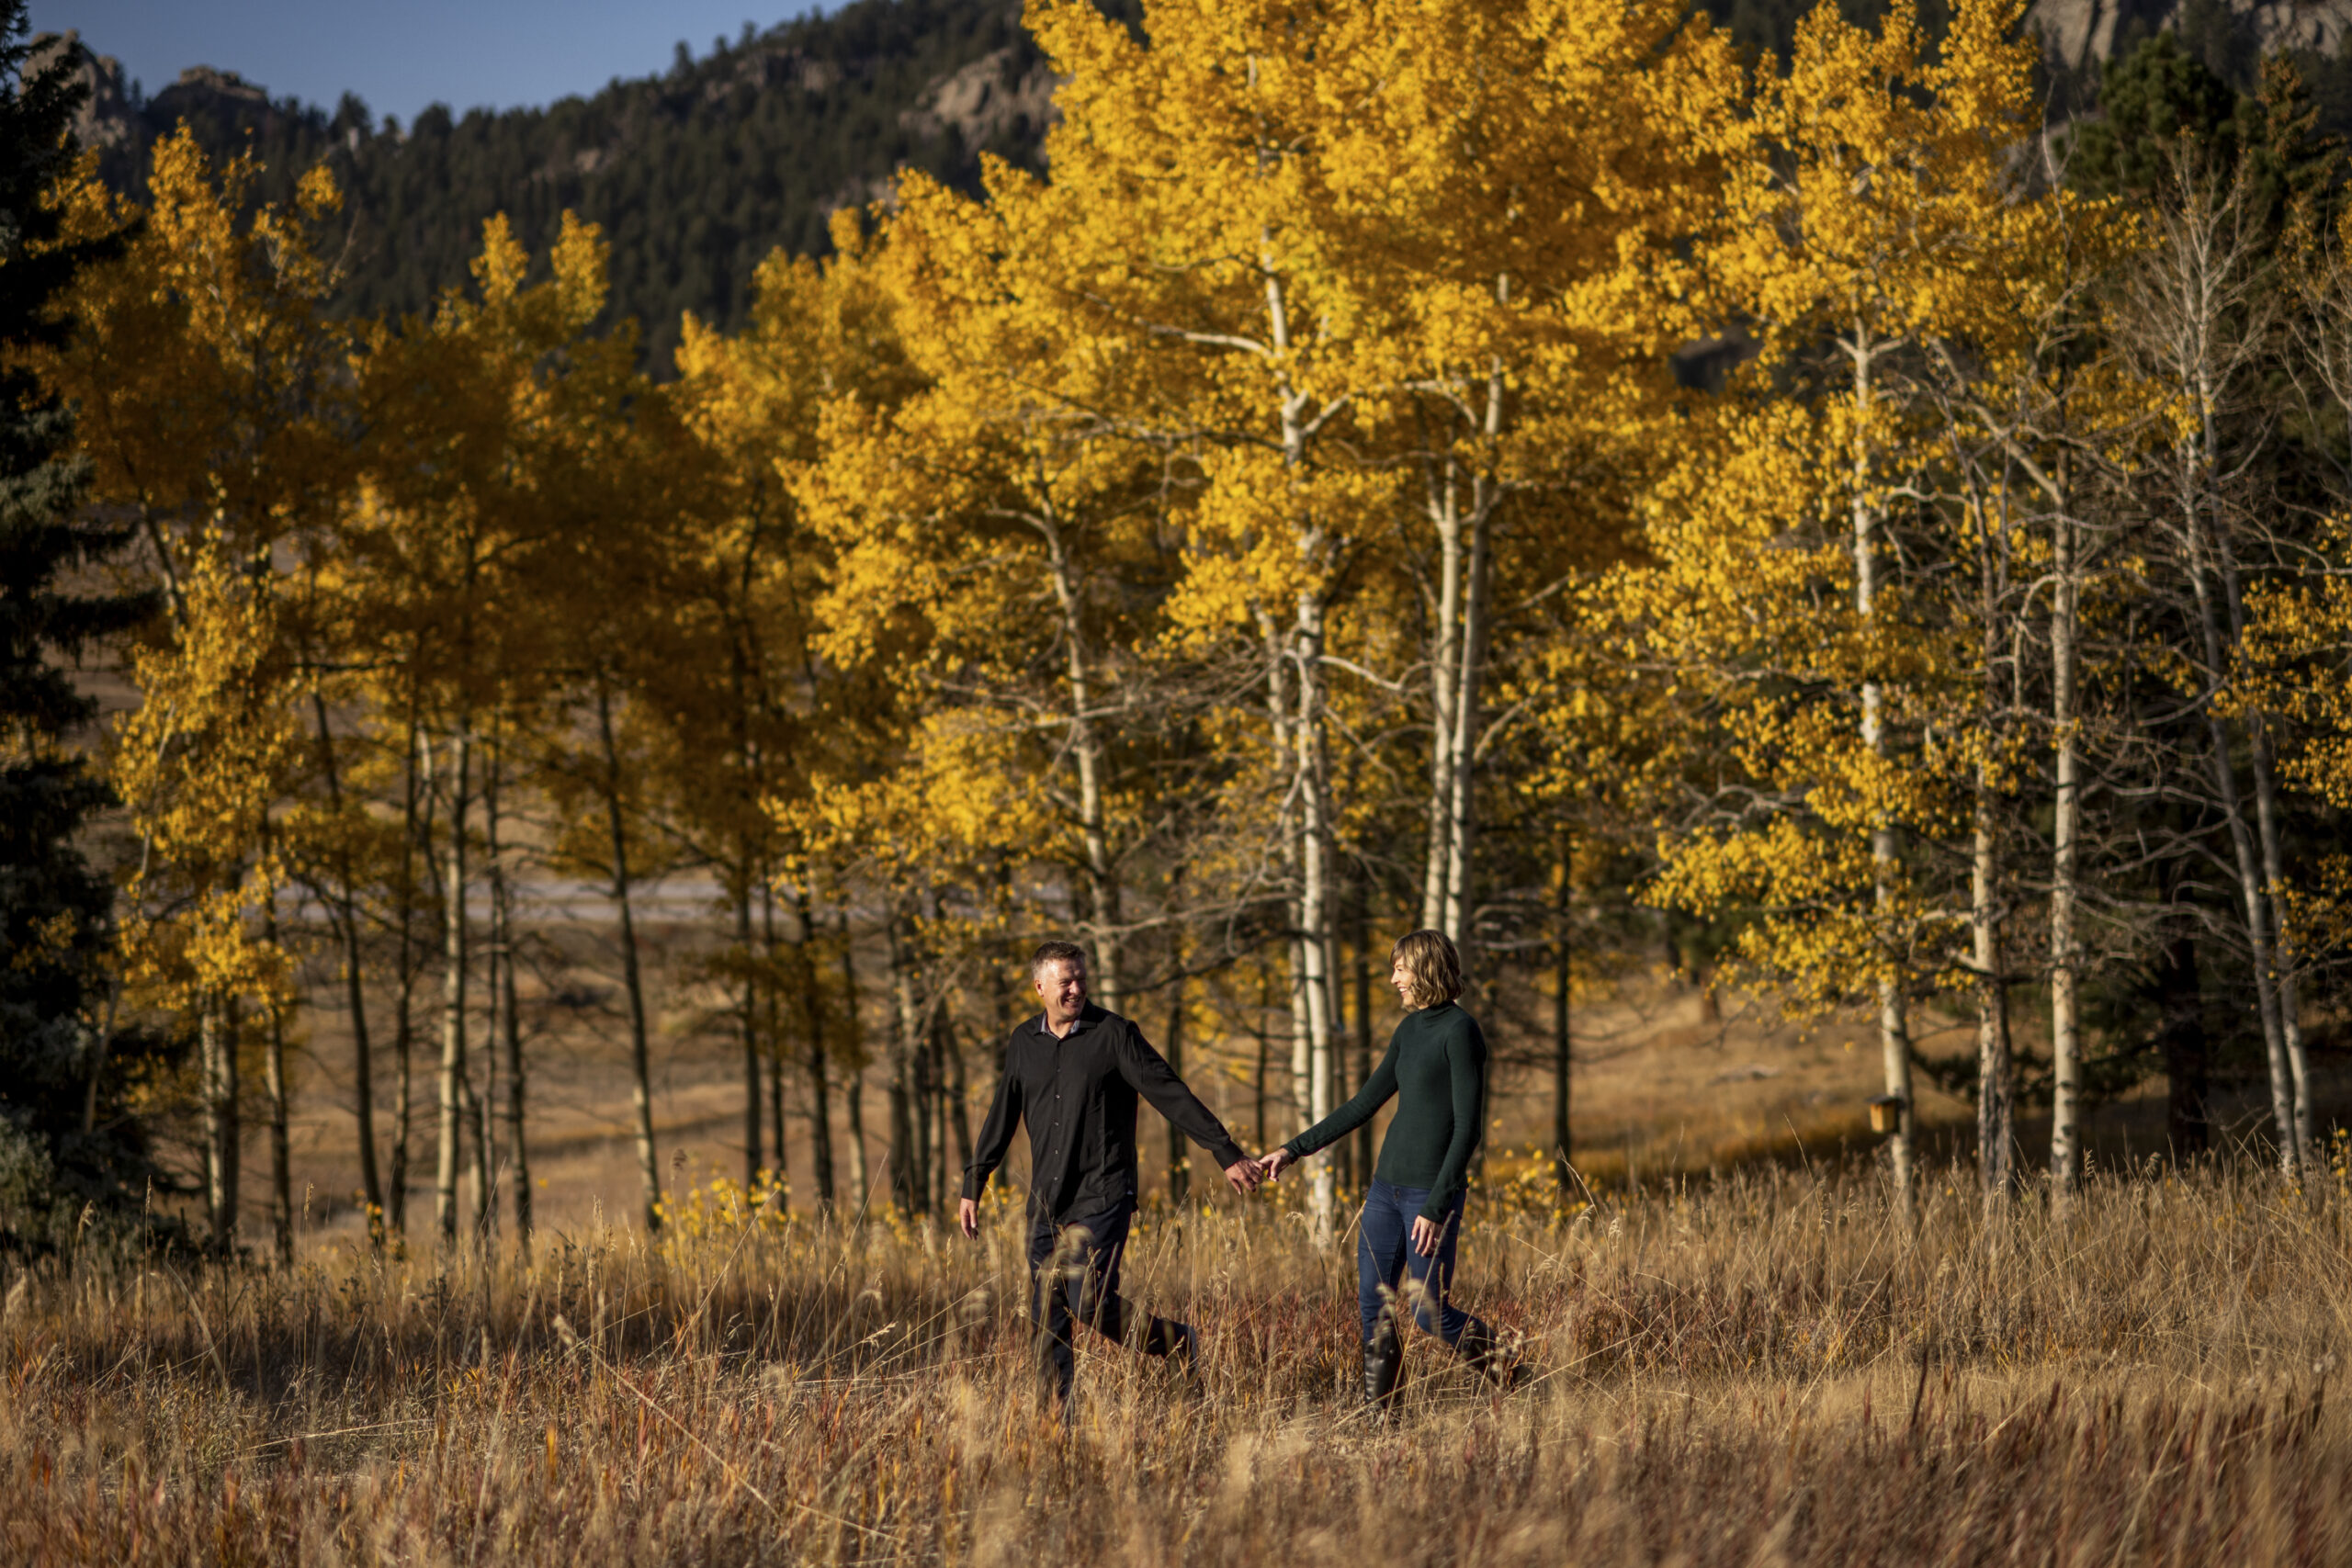 A man in a black shirt leads a woman in a green shirt during an engagement session at Meyer Ranch Park with yellow fall leaves in the background.